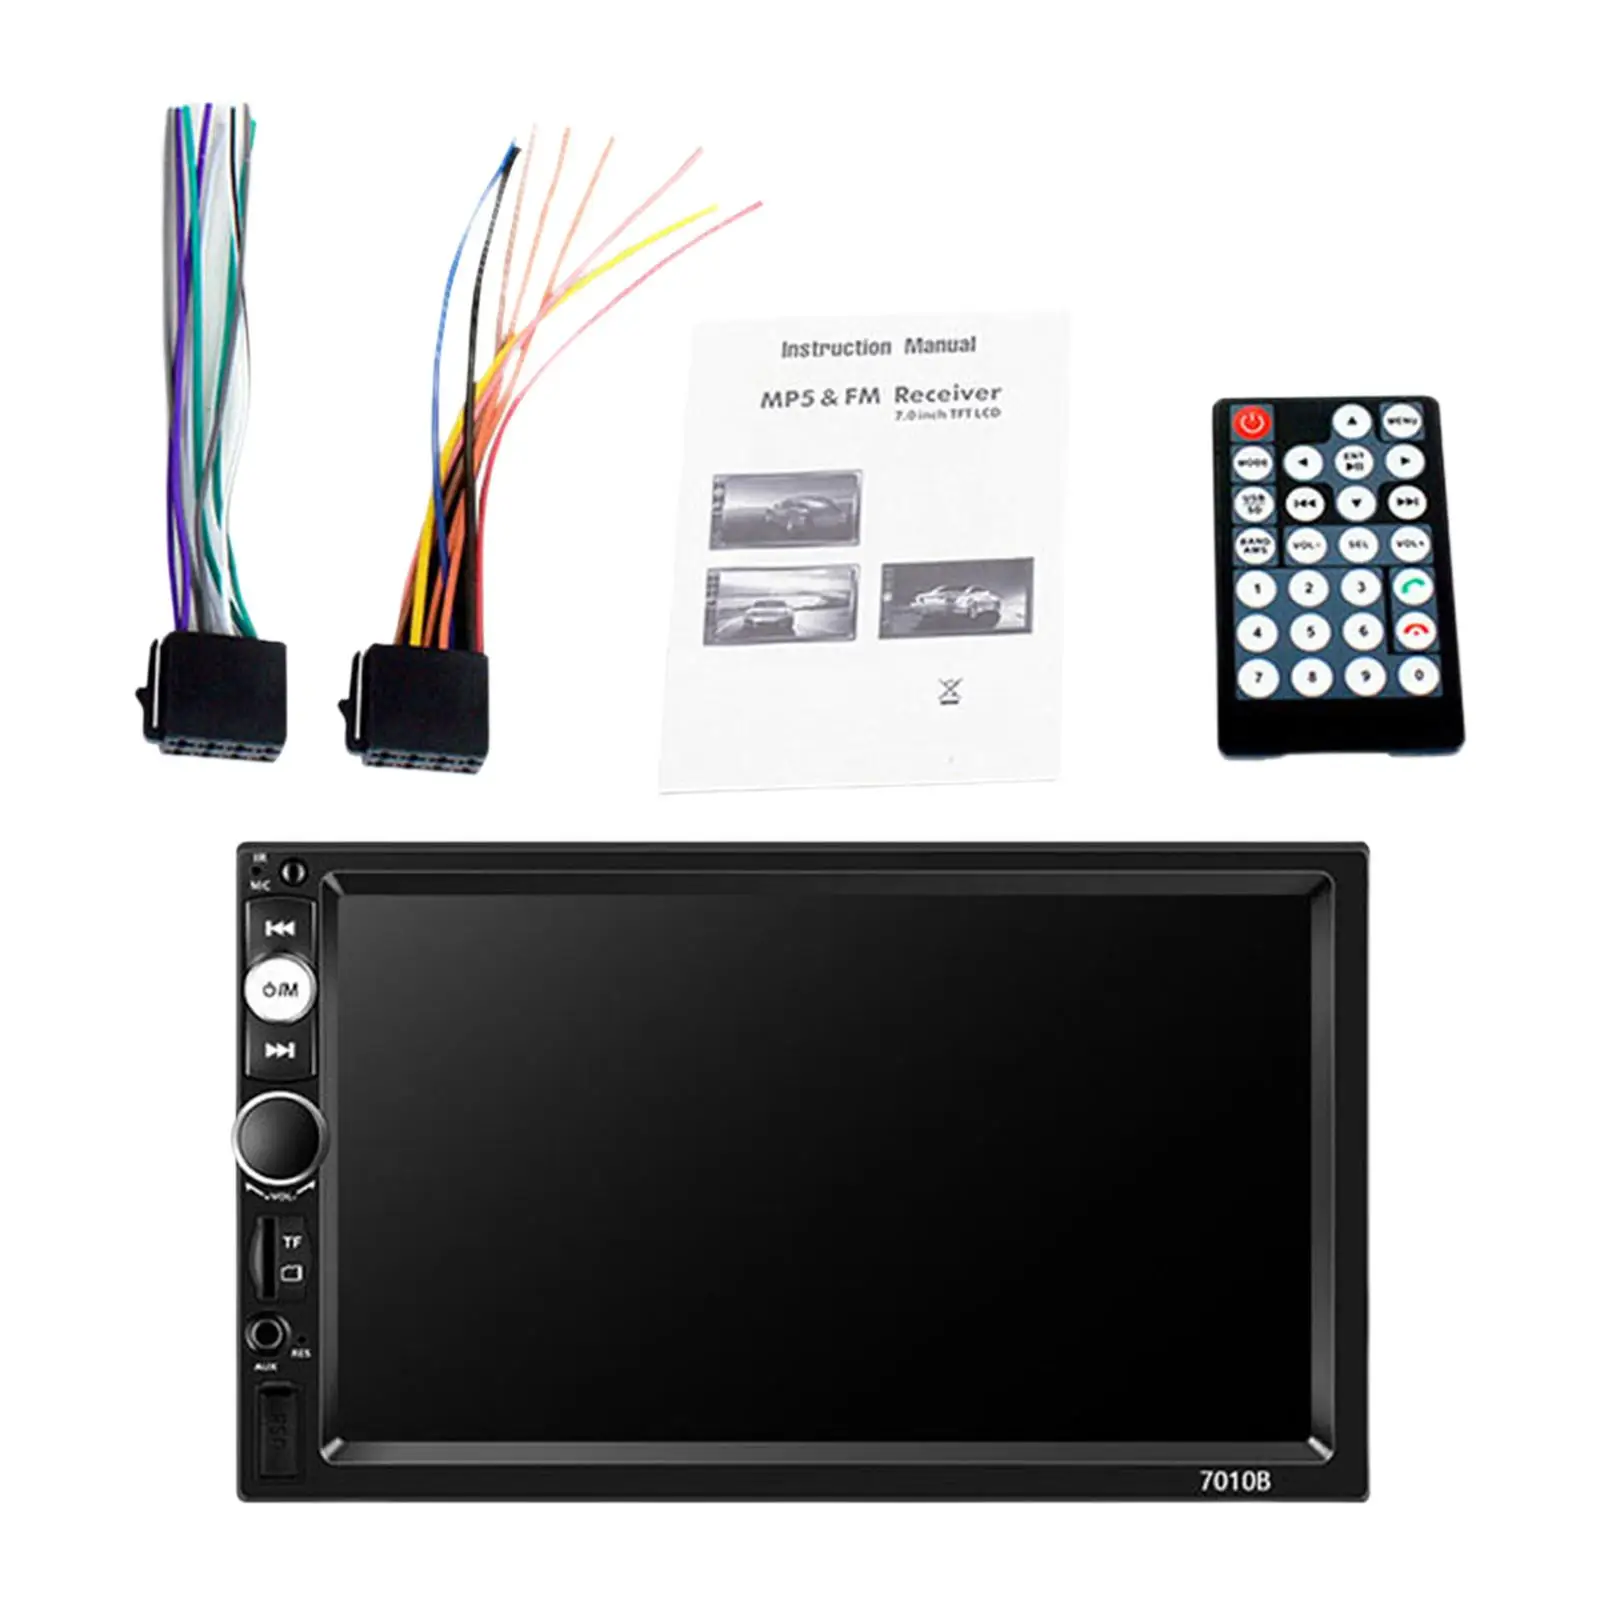 Multimedia Player Stereo Sound 7in LCD Touchscreen for Automotive RV